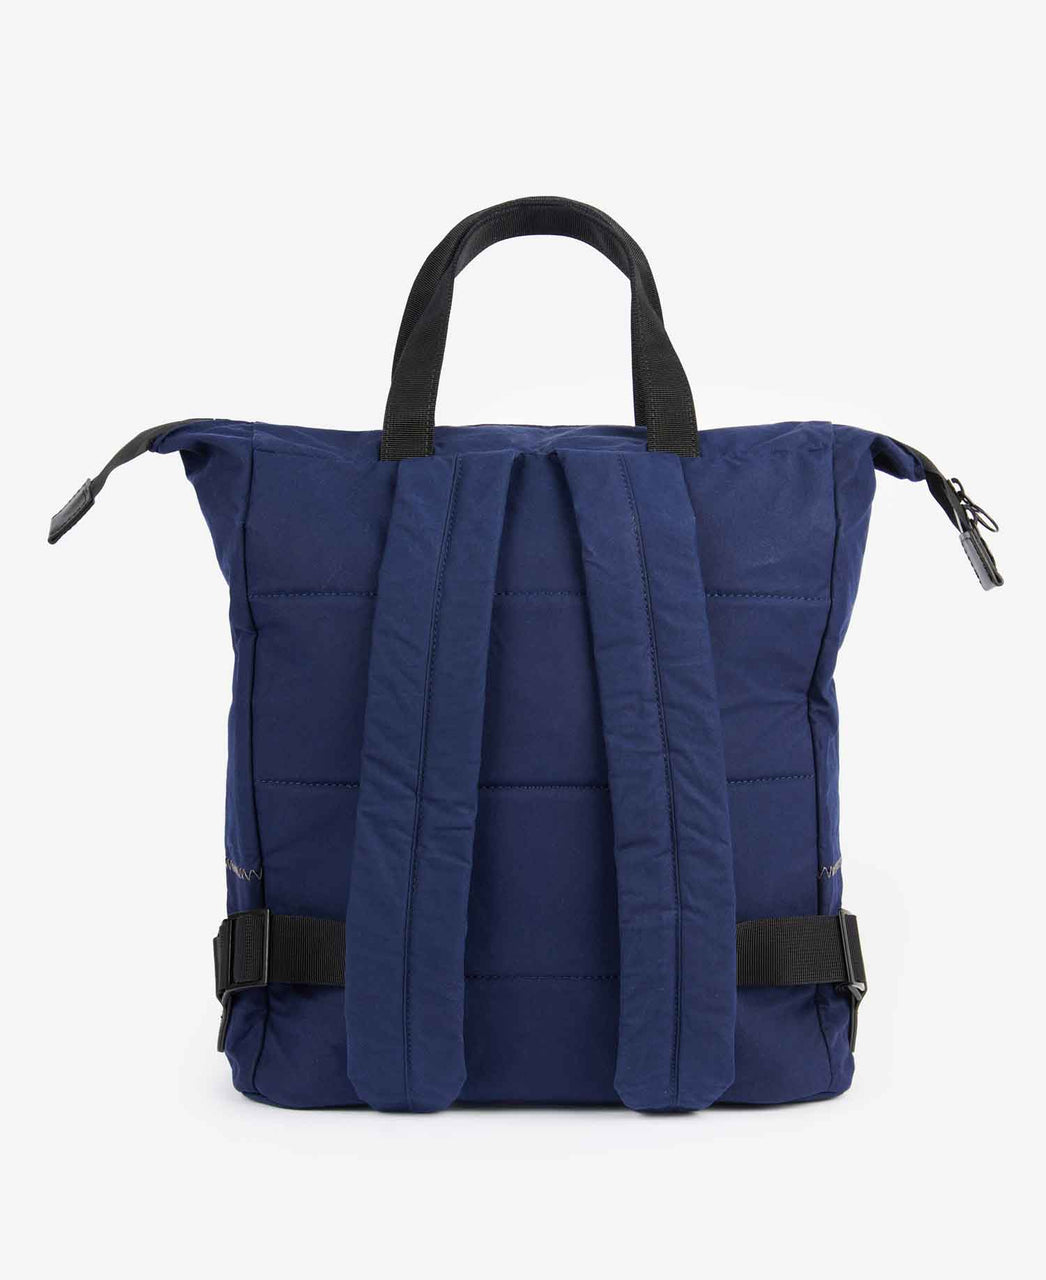 Ally Capellino x Barbour Ben Waxed Cotton Backpack in Navy